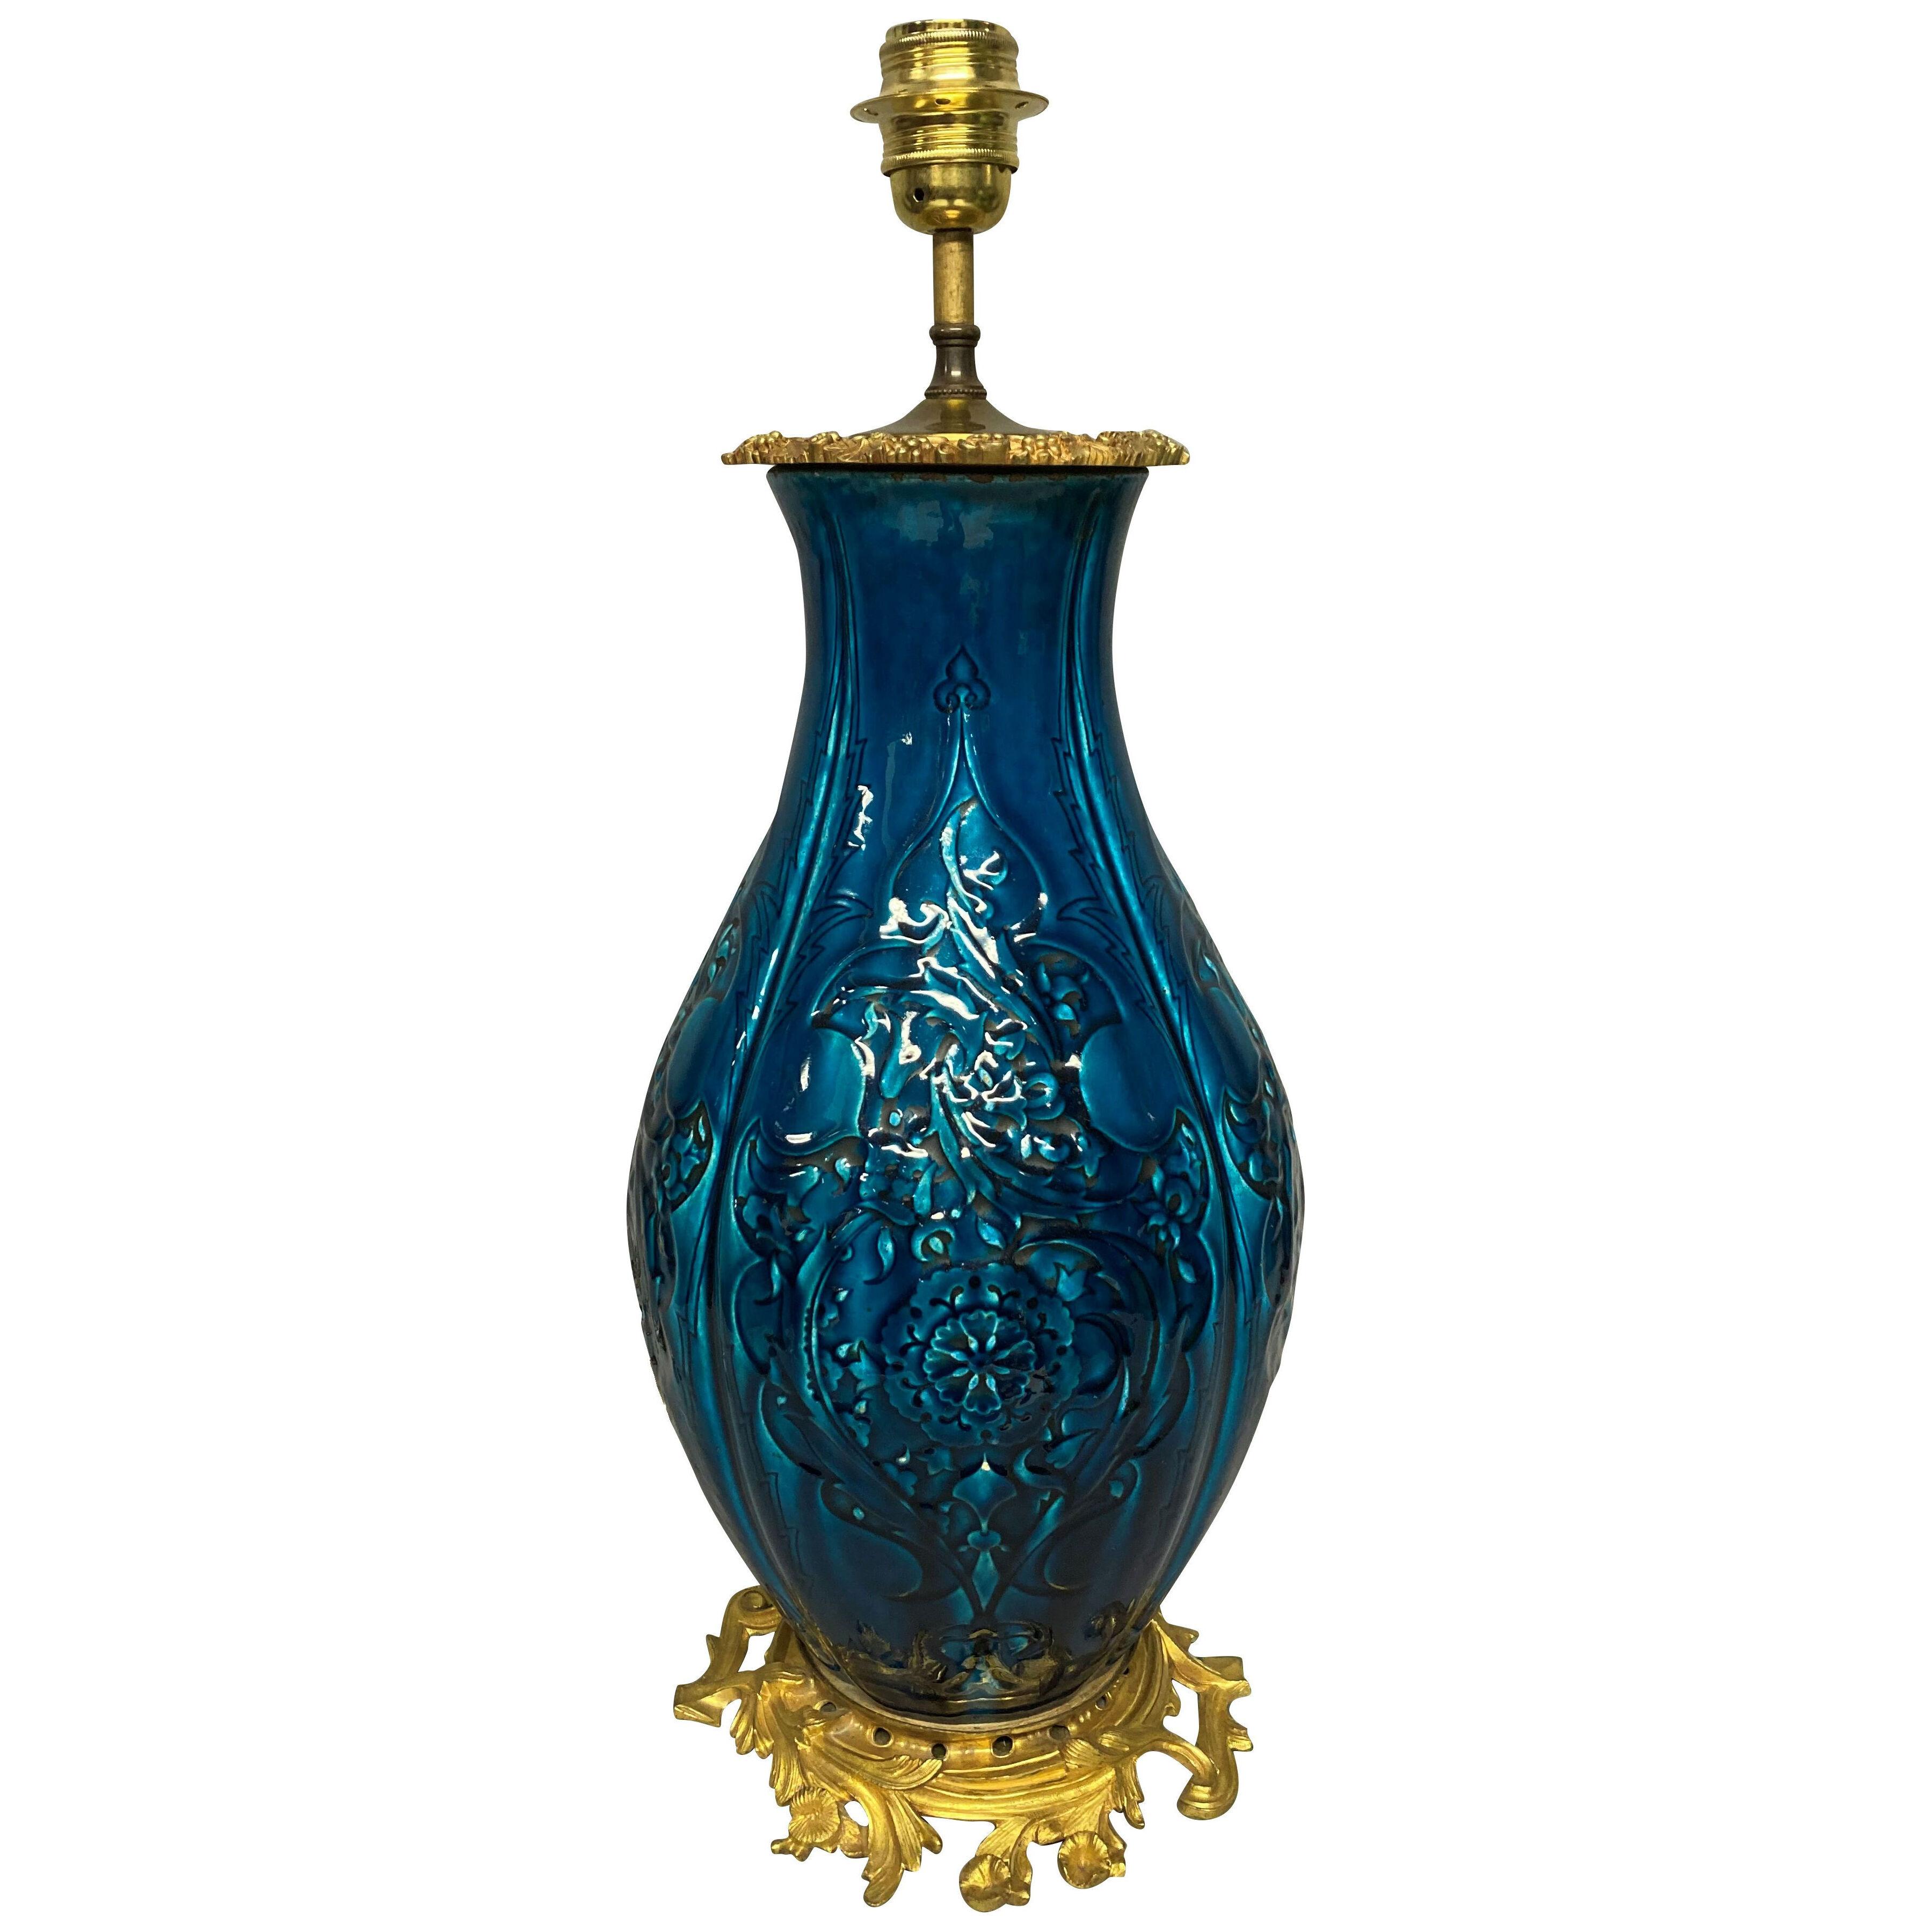 A CHINESE BLUE PORCELAIN & GILT BRONZE MOUNTED LAMP